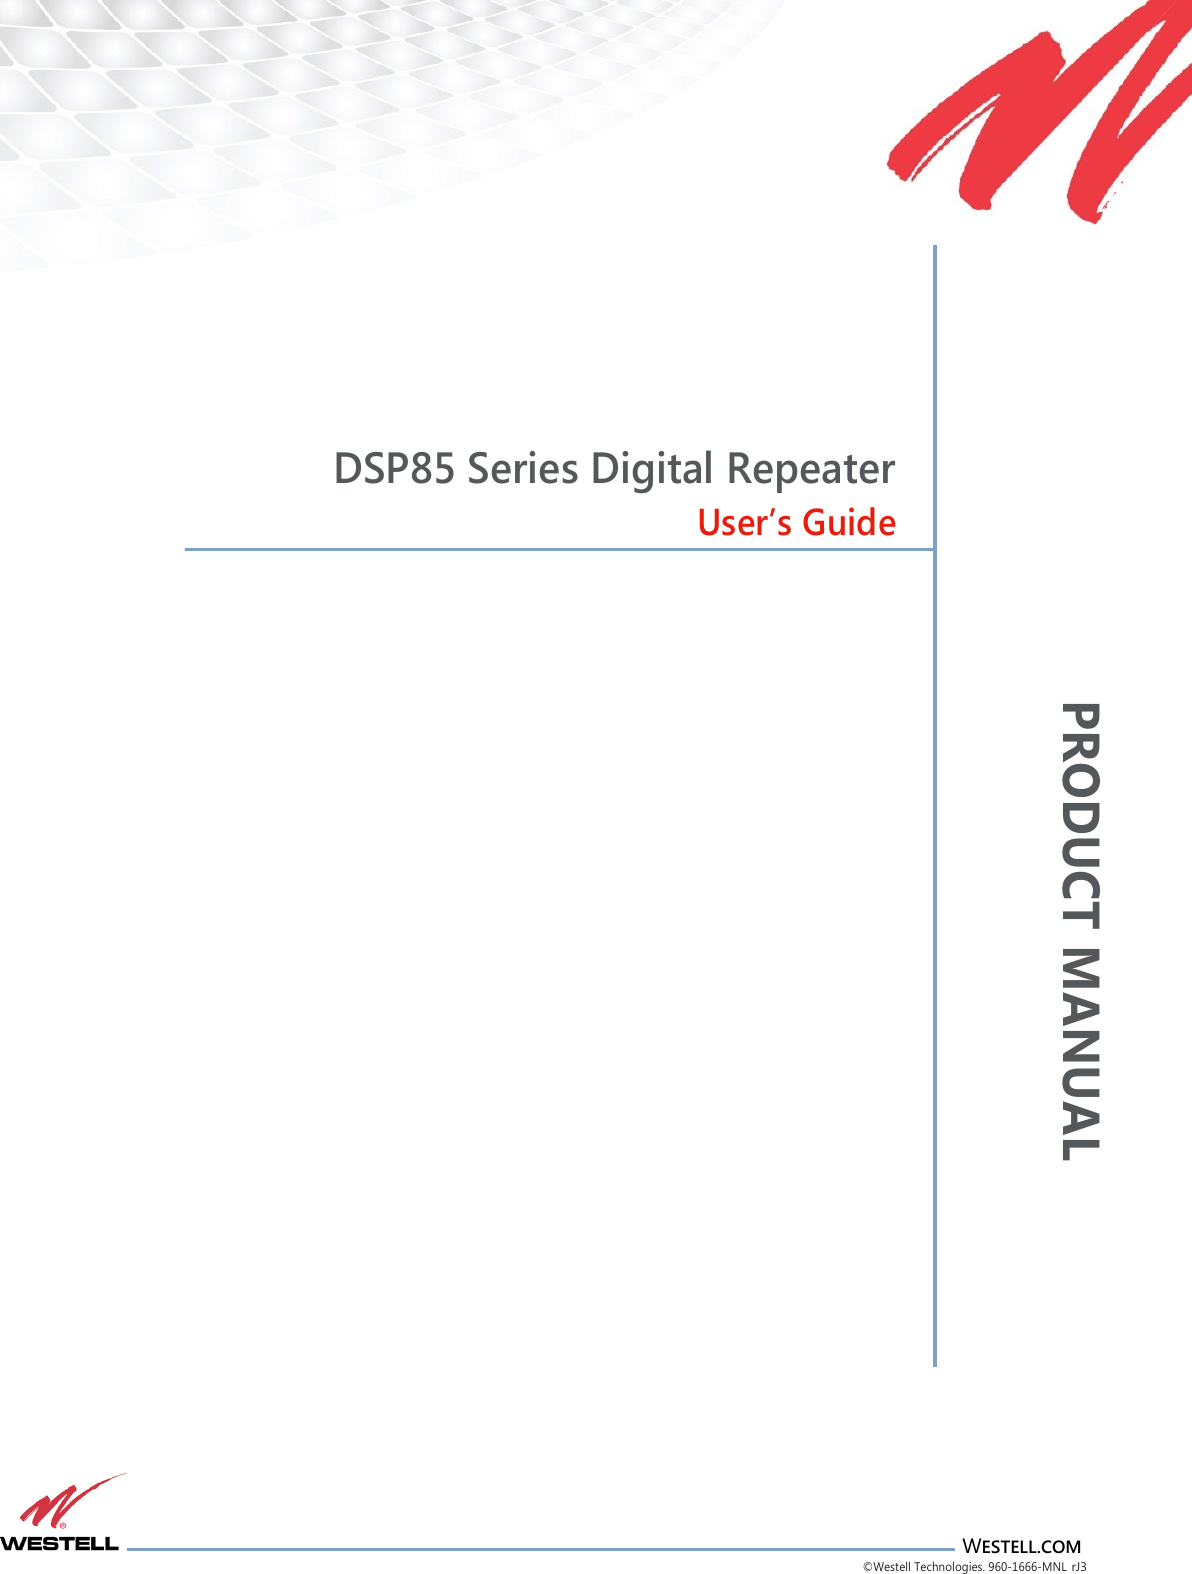 PRODUCT MANUAL                       WESTELL.COM ©Westell Technologies. 960-1666-MNL rJ3           DSP85 Series Digital Repeater User’s Guide                                         